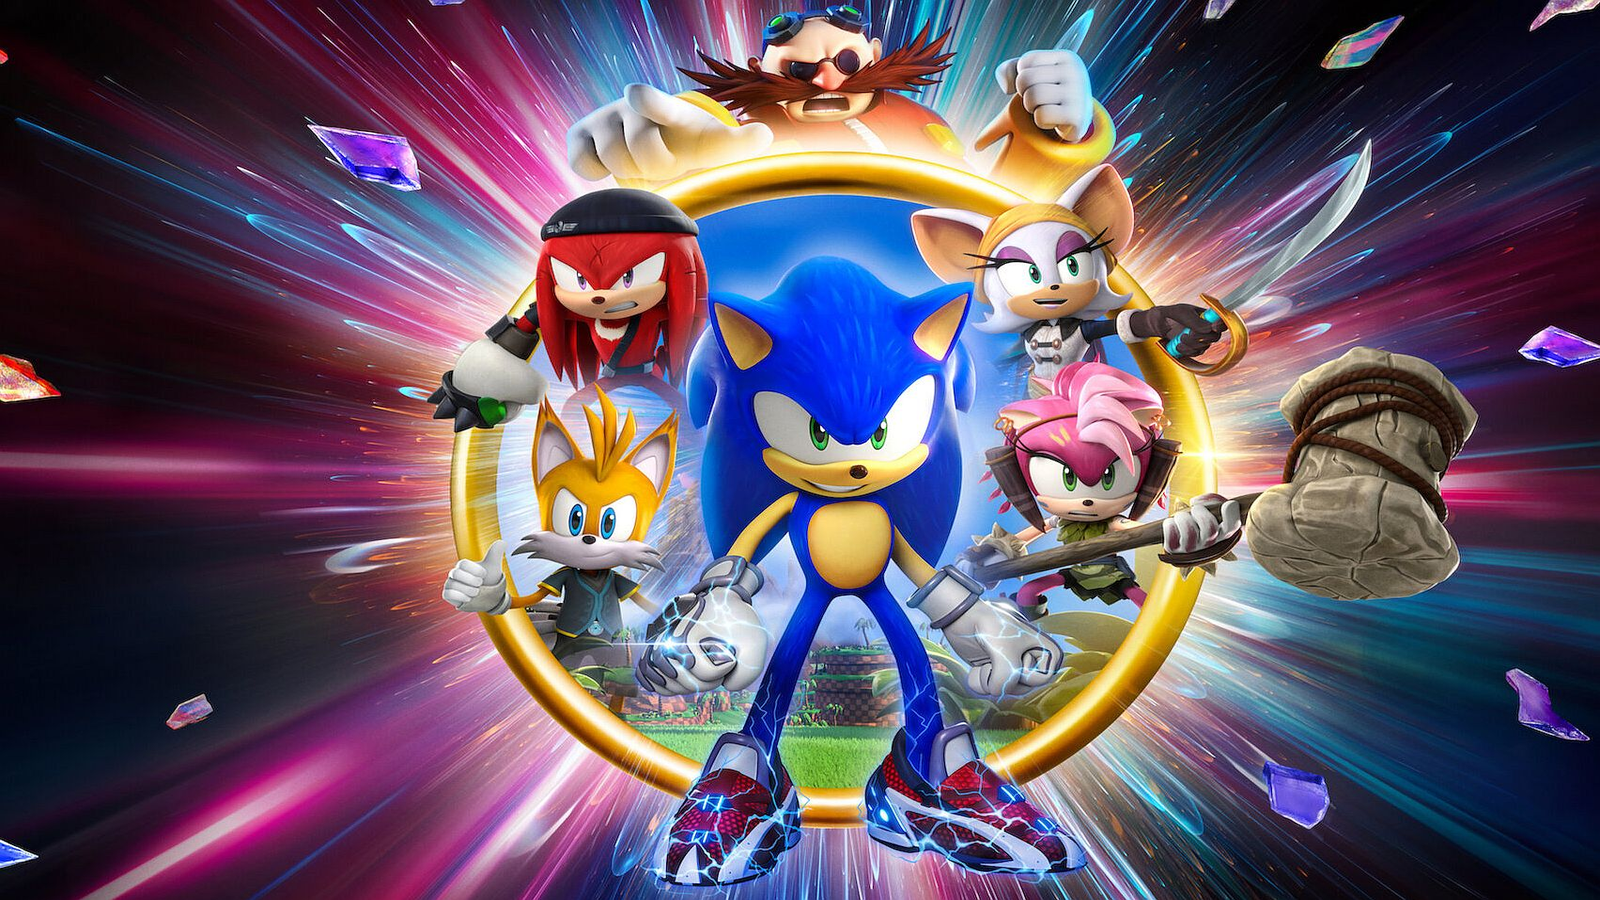 Sonic Prime season 3: Sonic Prime Season 3: Exciting teasers and